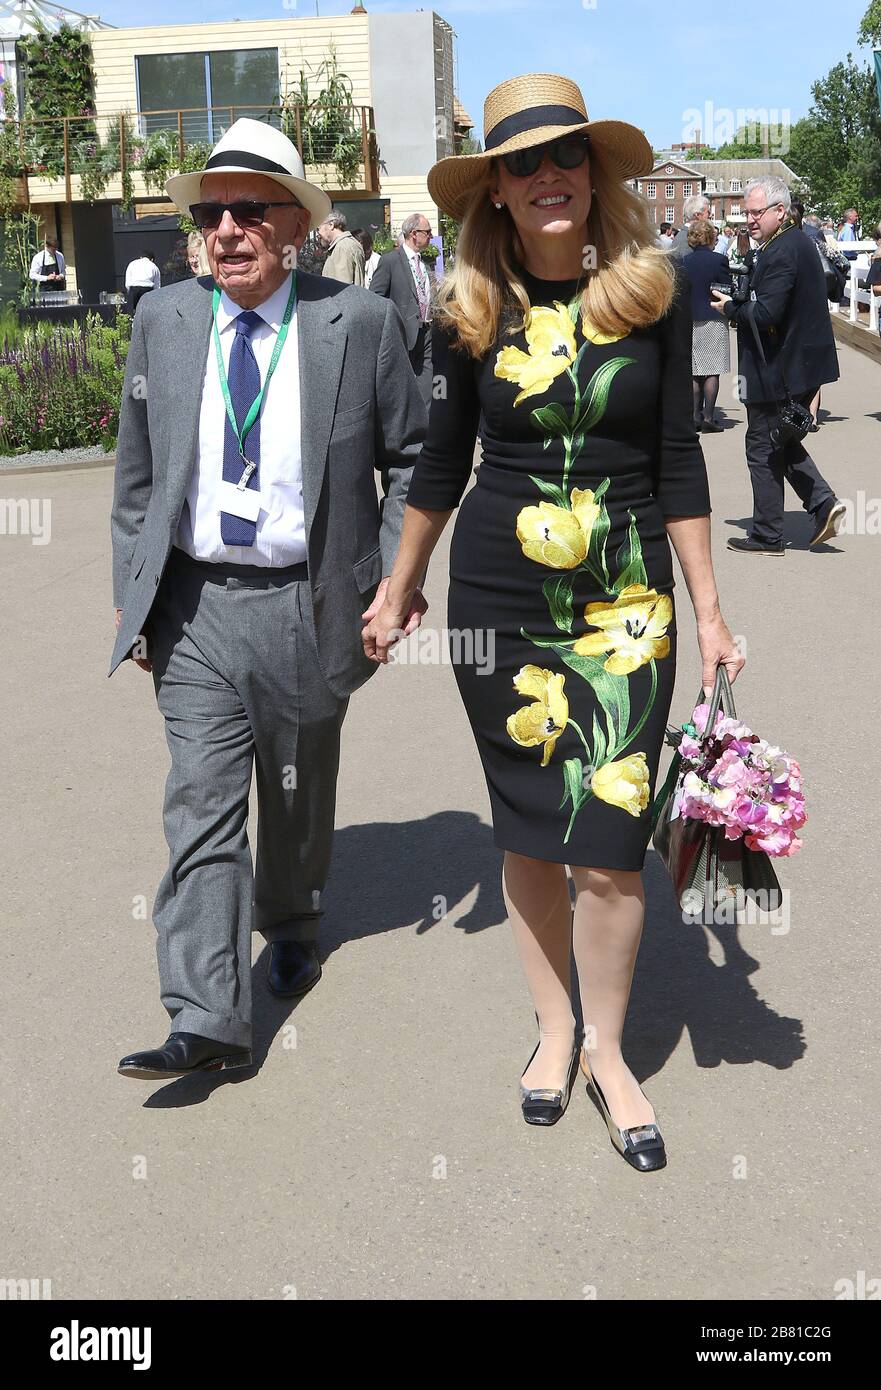 May 22, 2017 - London, England, UK - Chelsea Flower Show 2017 Press Day, Royal Hospital Chelsea  Photo Shows: Rupert Murdoch and Jerry Hall Stock Photo